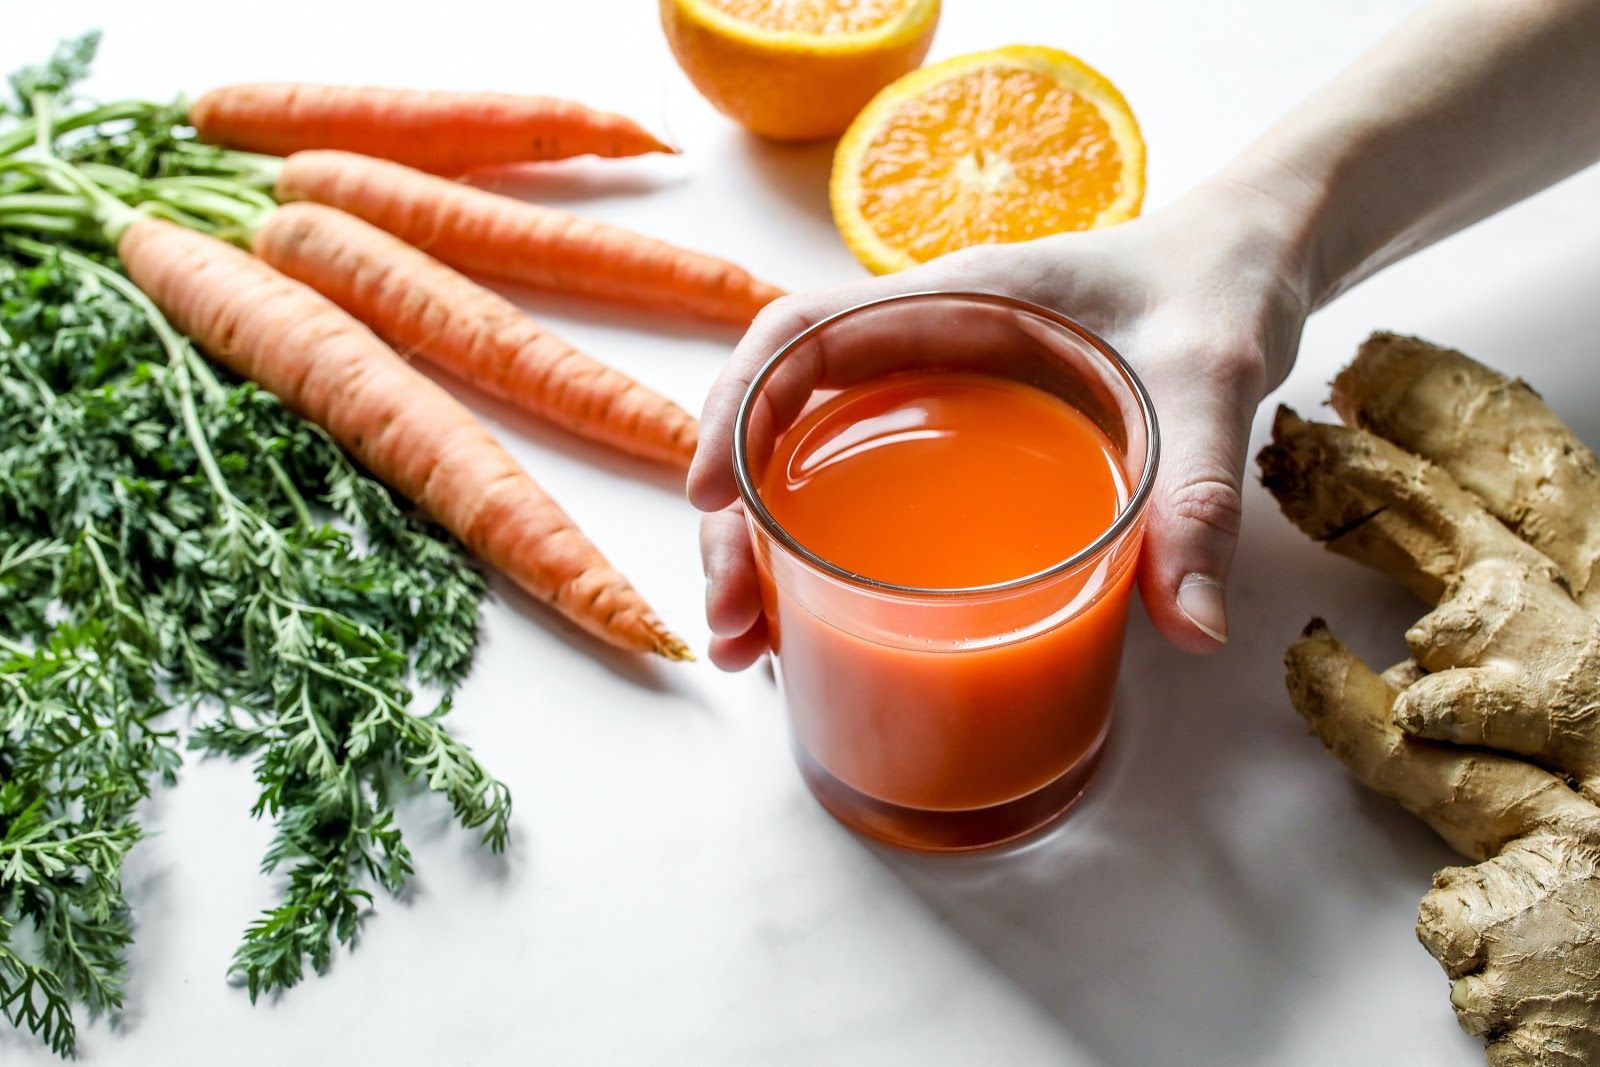 Recipes of Carrot Juice